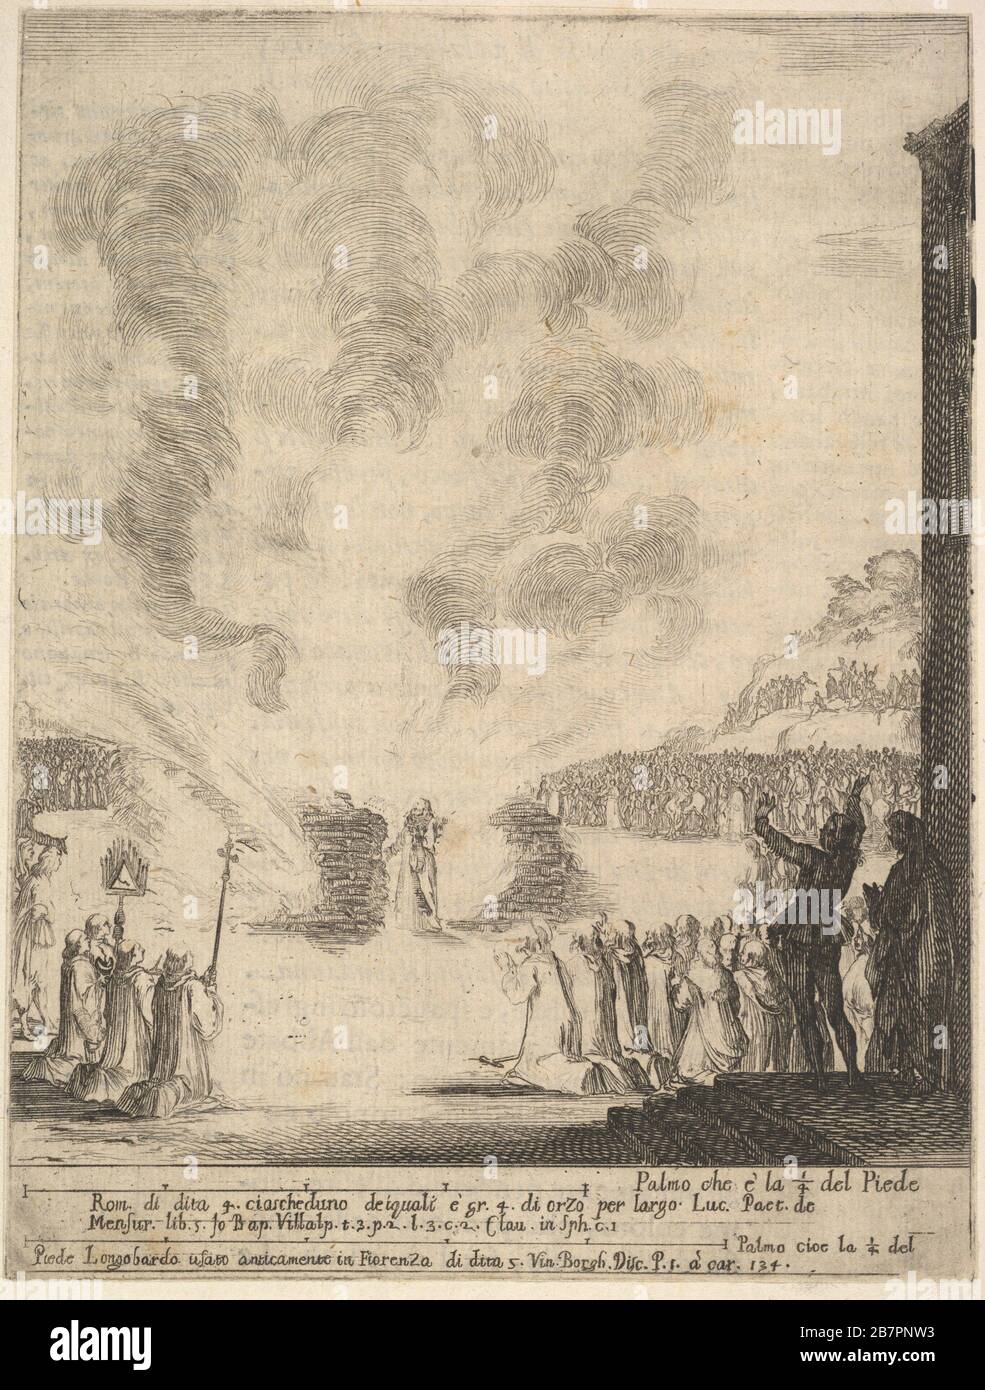 The test of fire, the monk Peter, the disciple Saint John Gualbert, passing through the flames from two pyres unharmed, various spectators to either side, from 'Frontispiece and four scenes from the life of Saint John Gualbert' (Frontispice et quatre vignettes pour une vie de Saint Jean Gualbert), 1640. Stock Photo